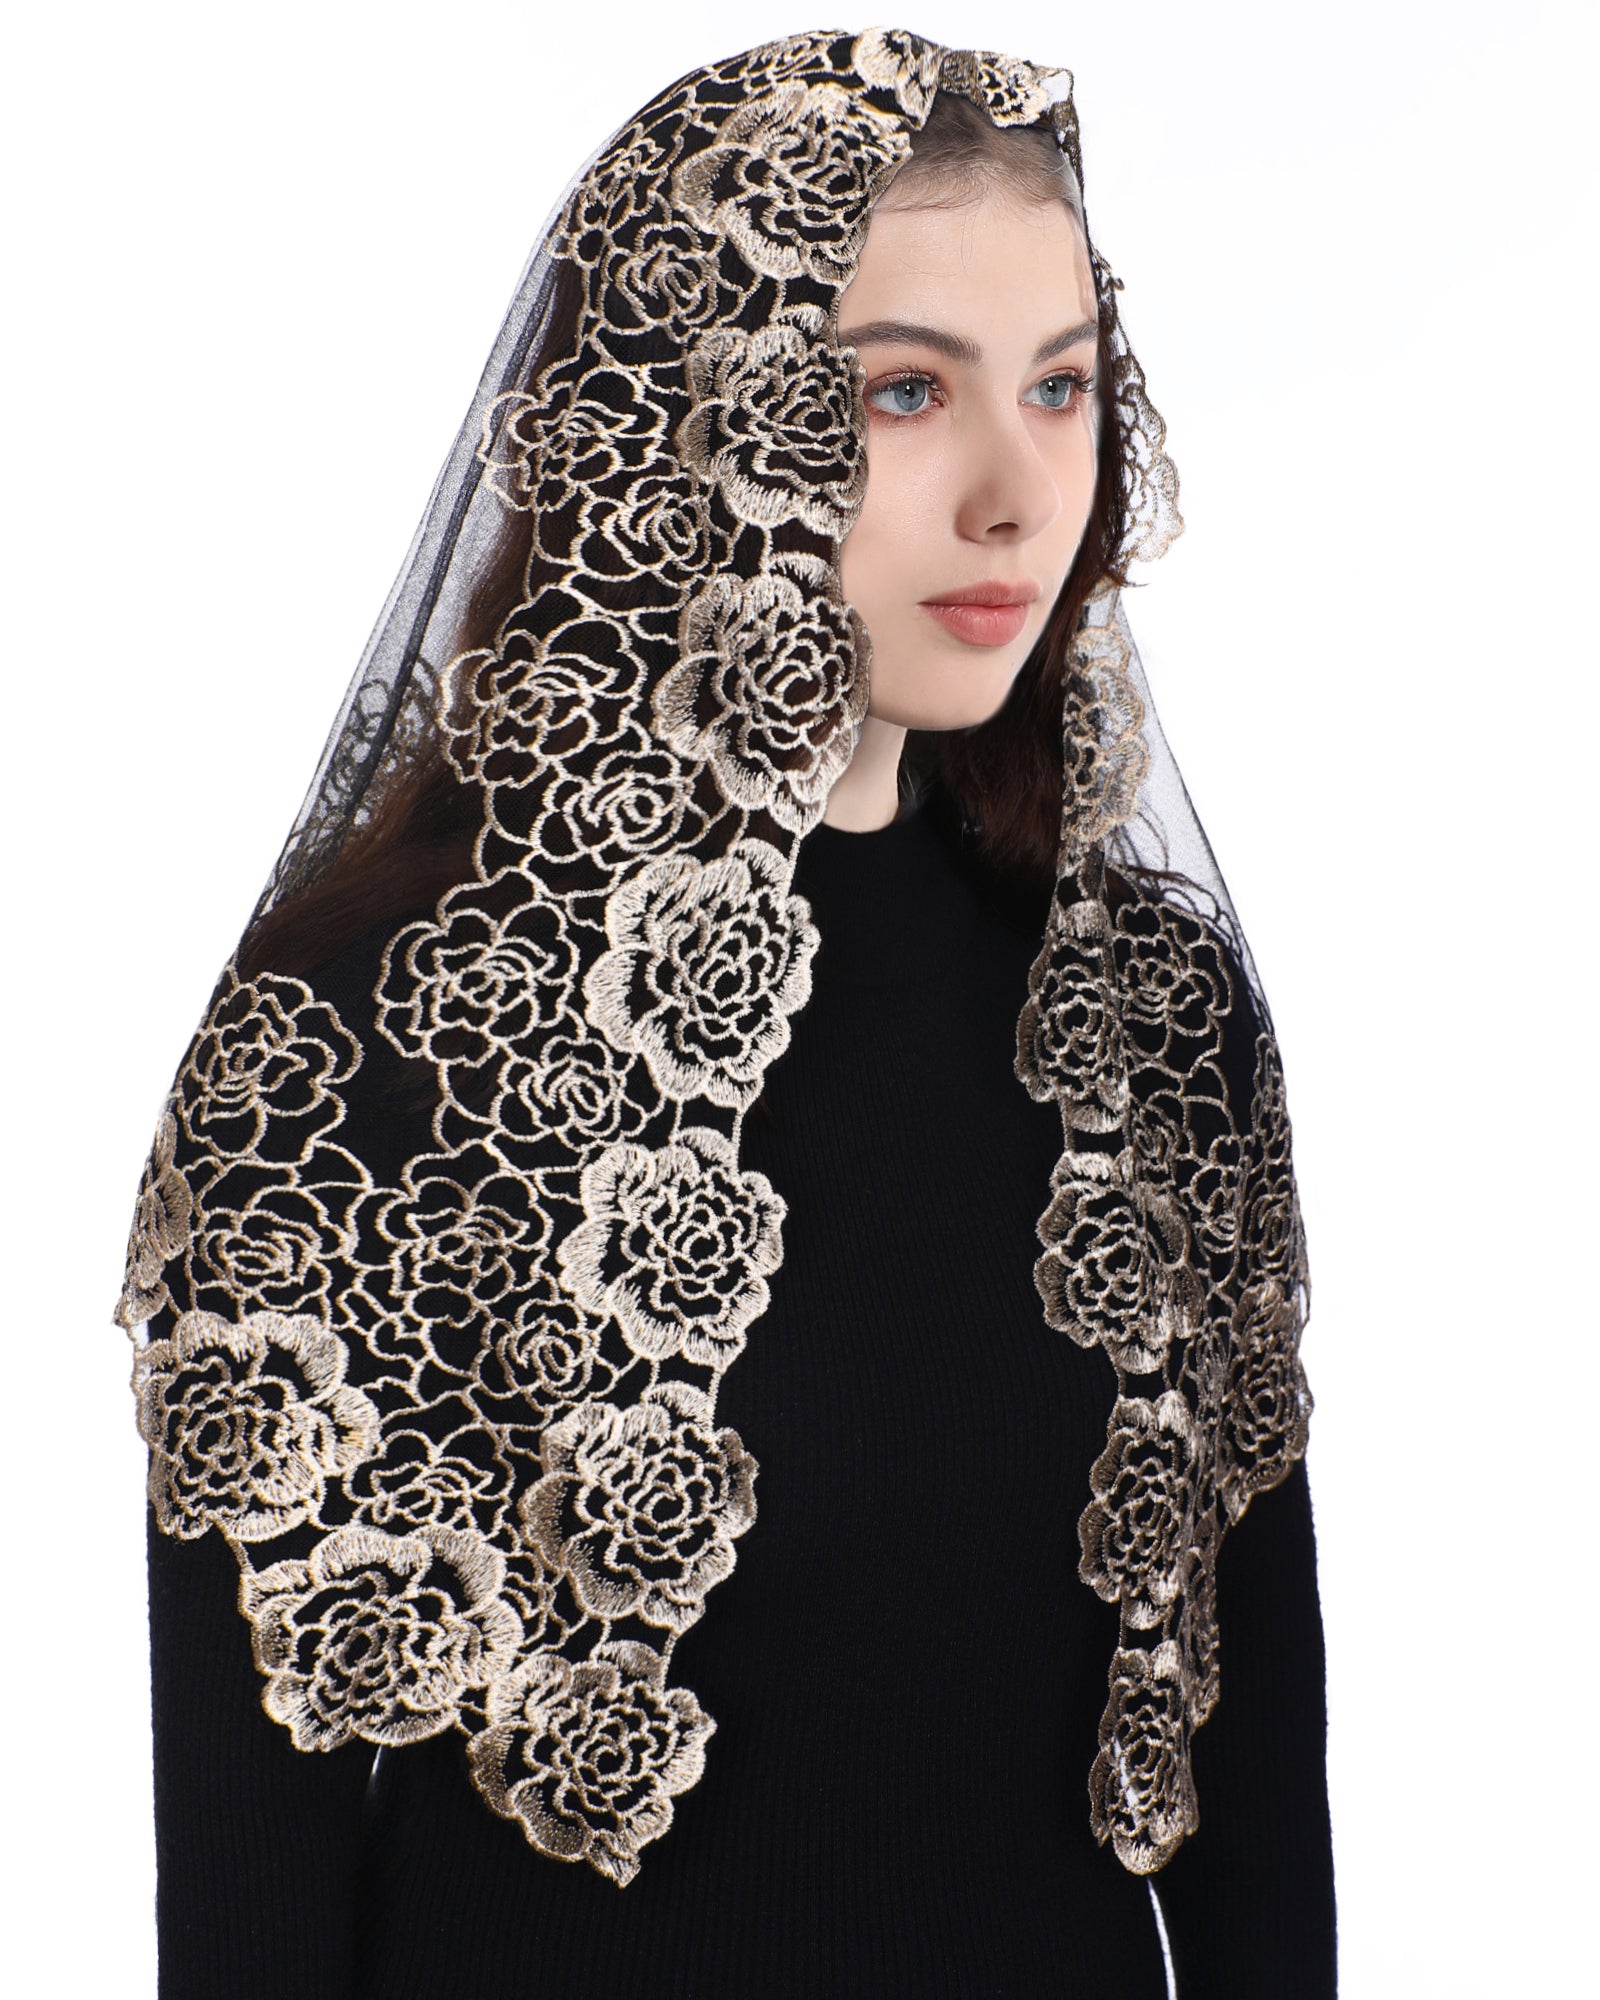 Cathedral Lace Veil Mantilla in Spanish Classic Style Lace 